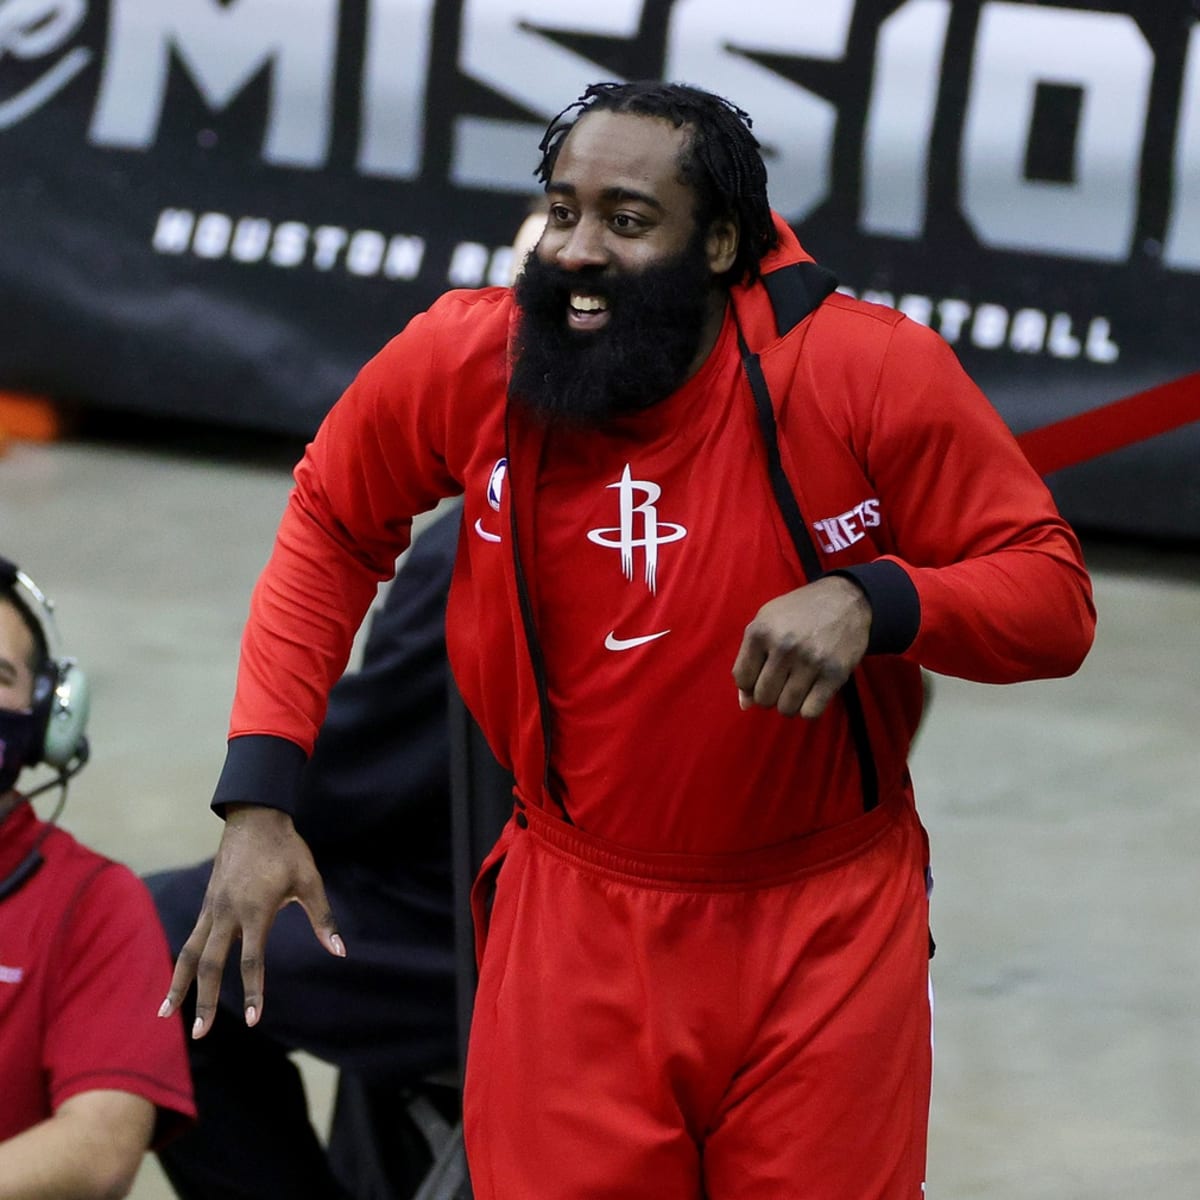 NBA Twitter reacts to James Harden's tirade against Daryl Morey